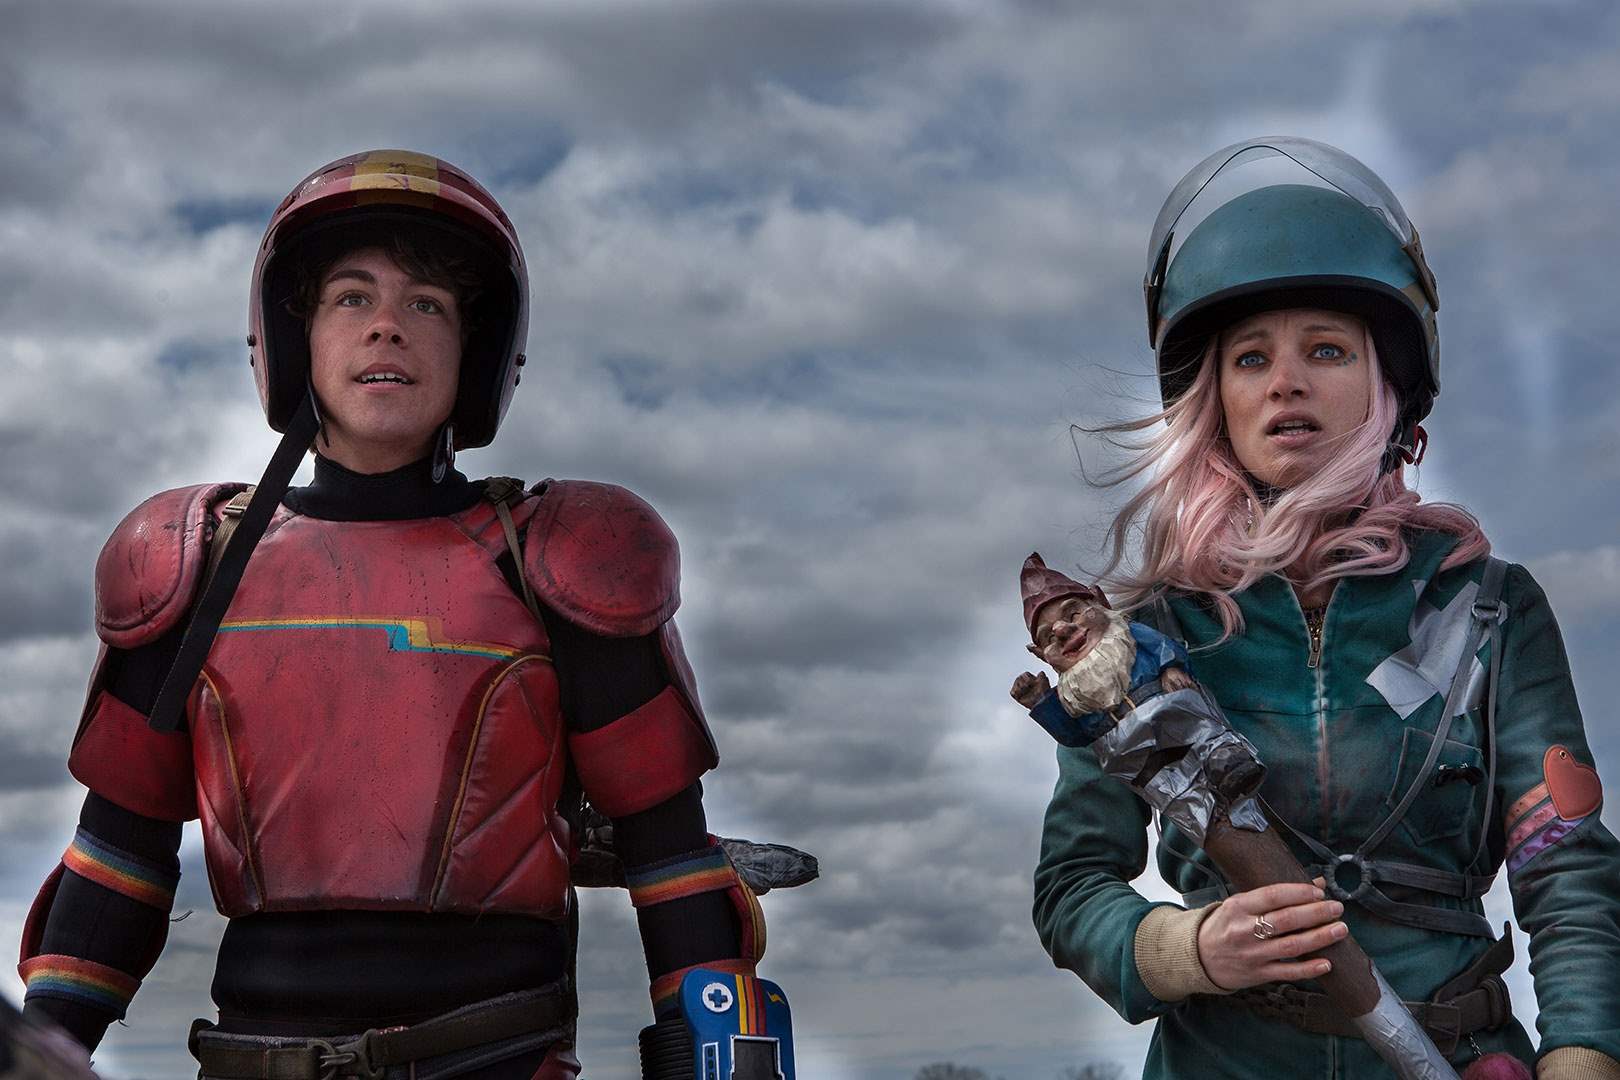 Munro Chambers and Laurence Leboeuf in Turbo Kid